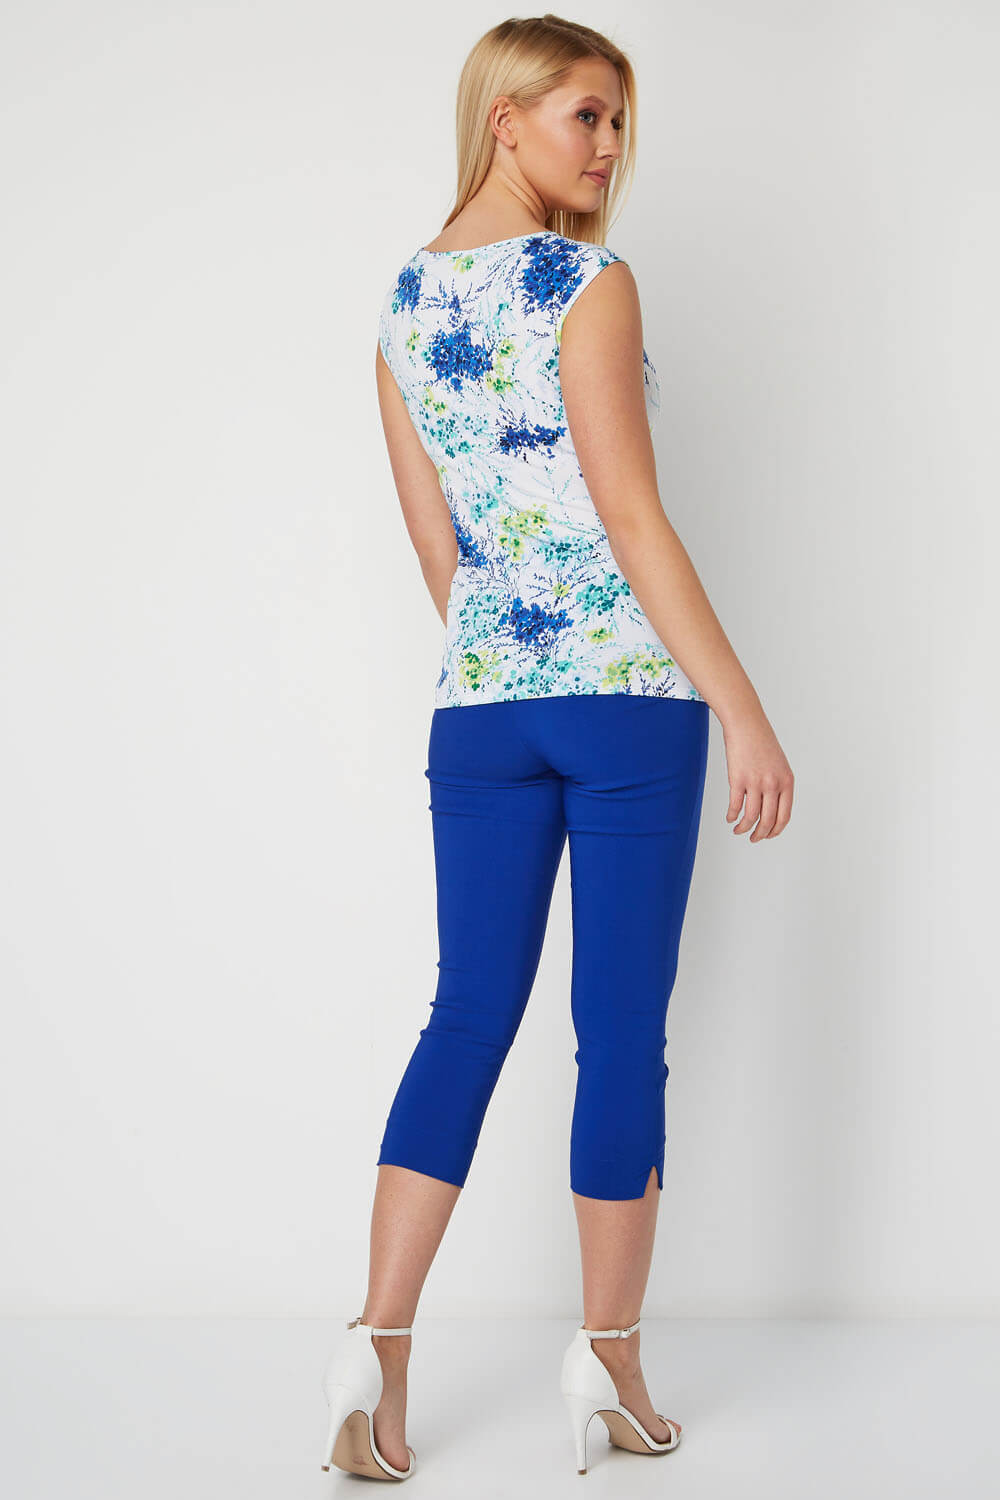 Blue Floral Side Pleat Top, Image 3 of 9